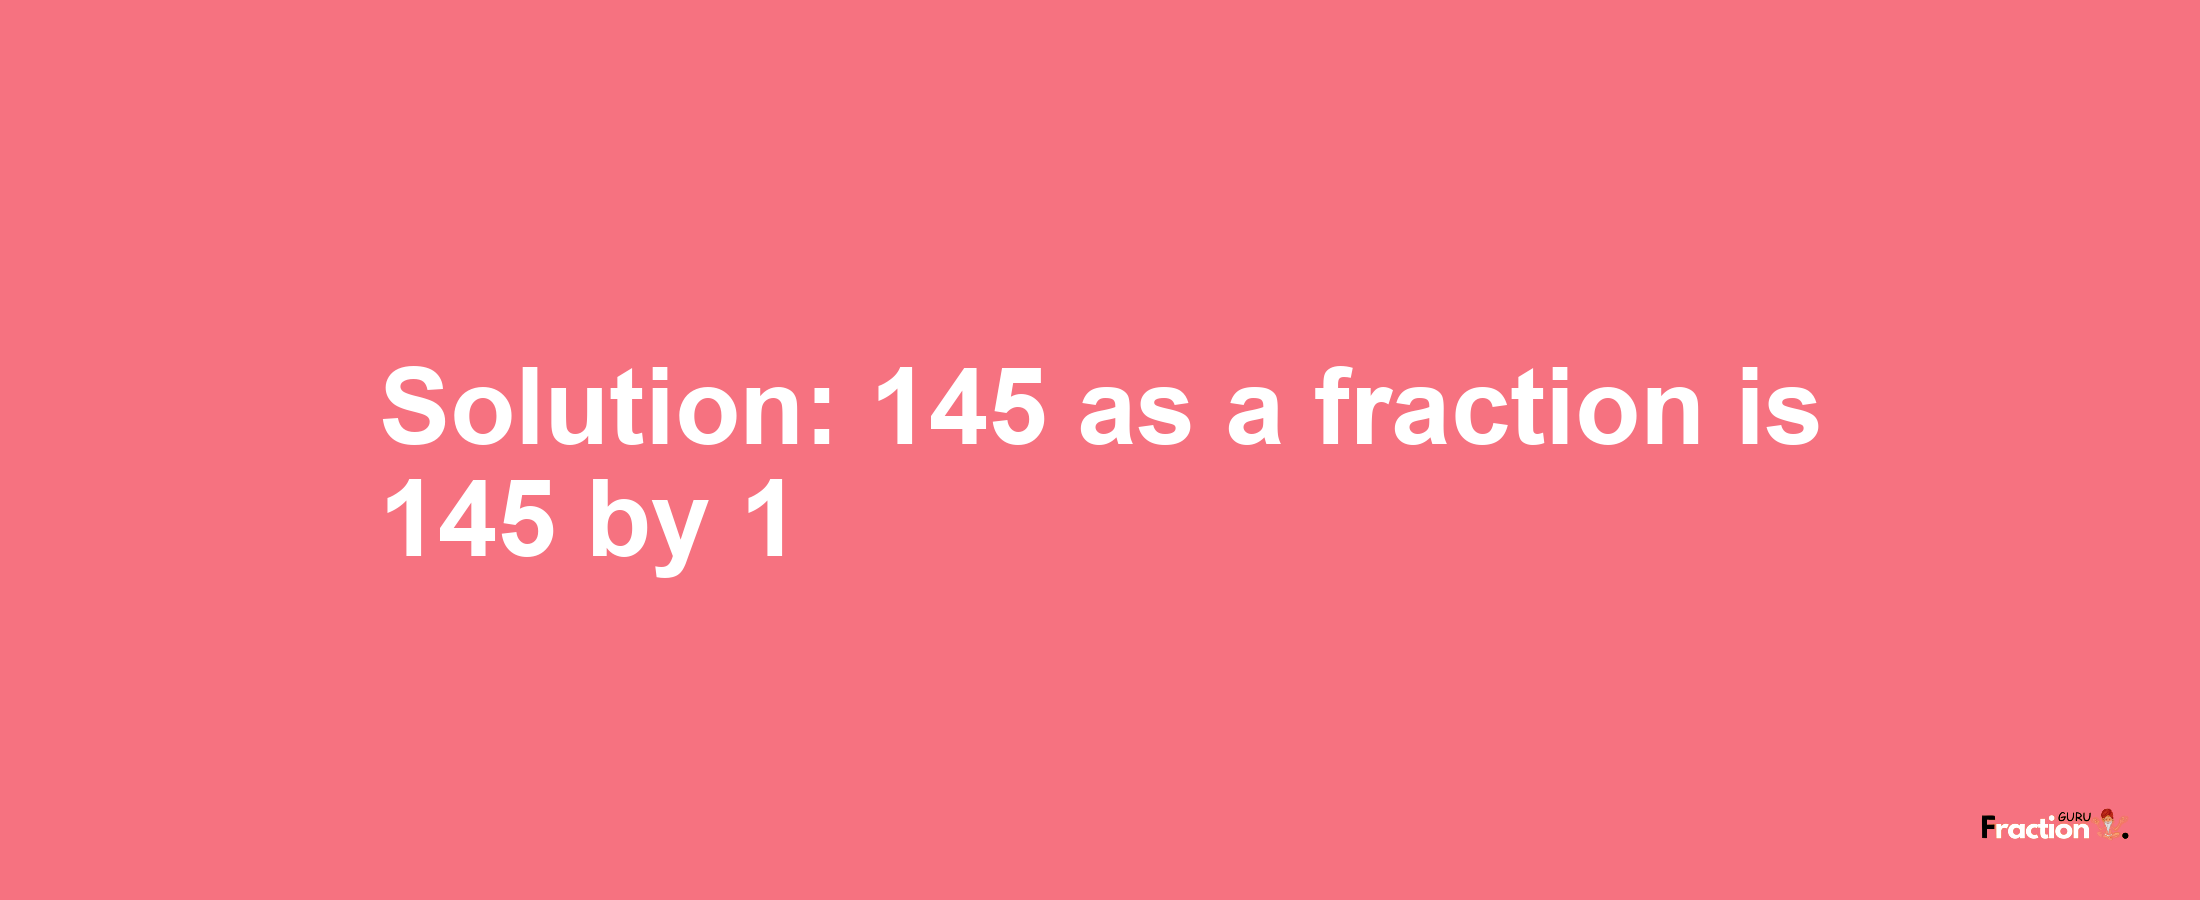 Solution:145 as a fraction is 145/1